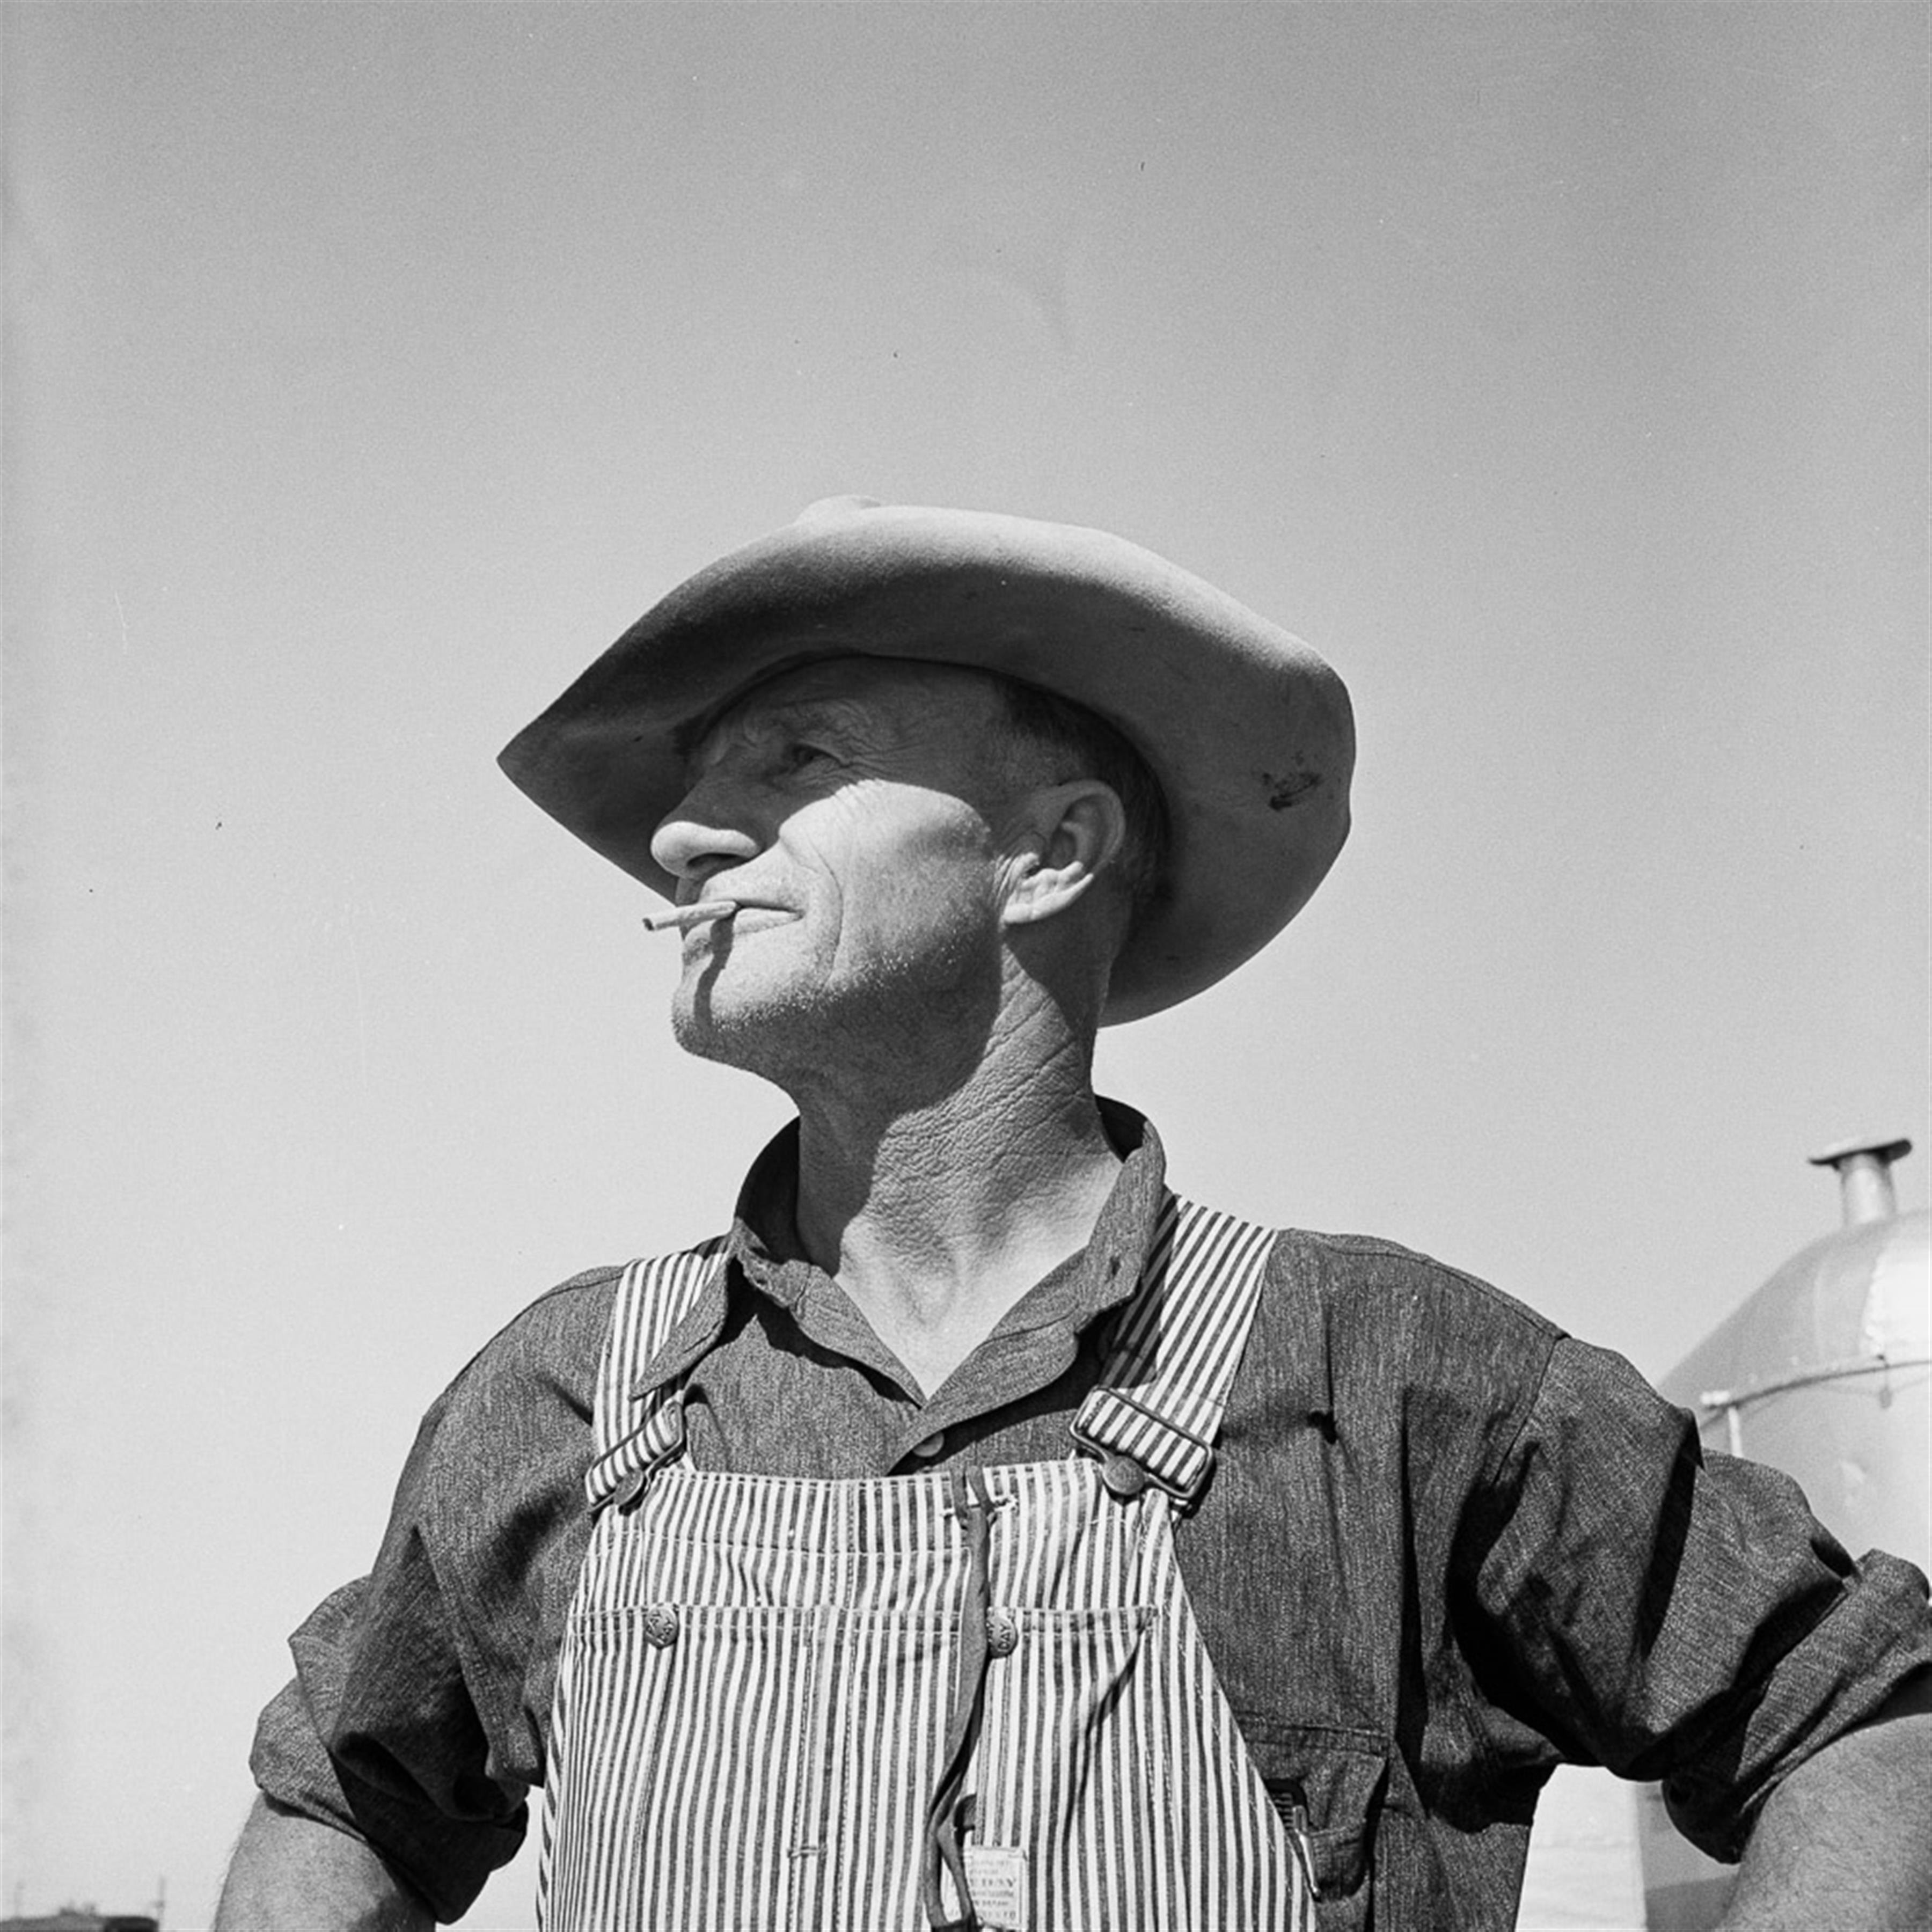 grayscale photography of man in overalls and cap